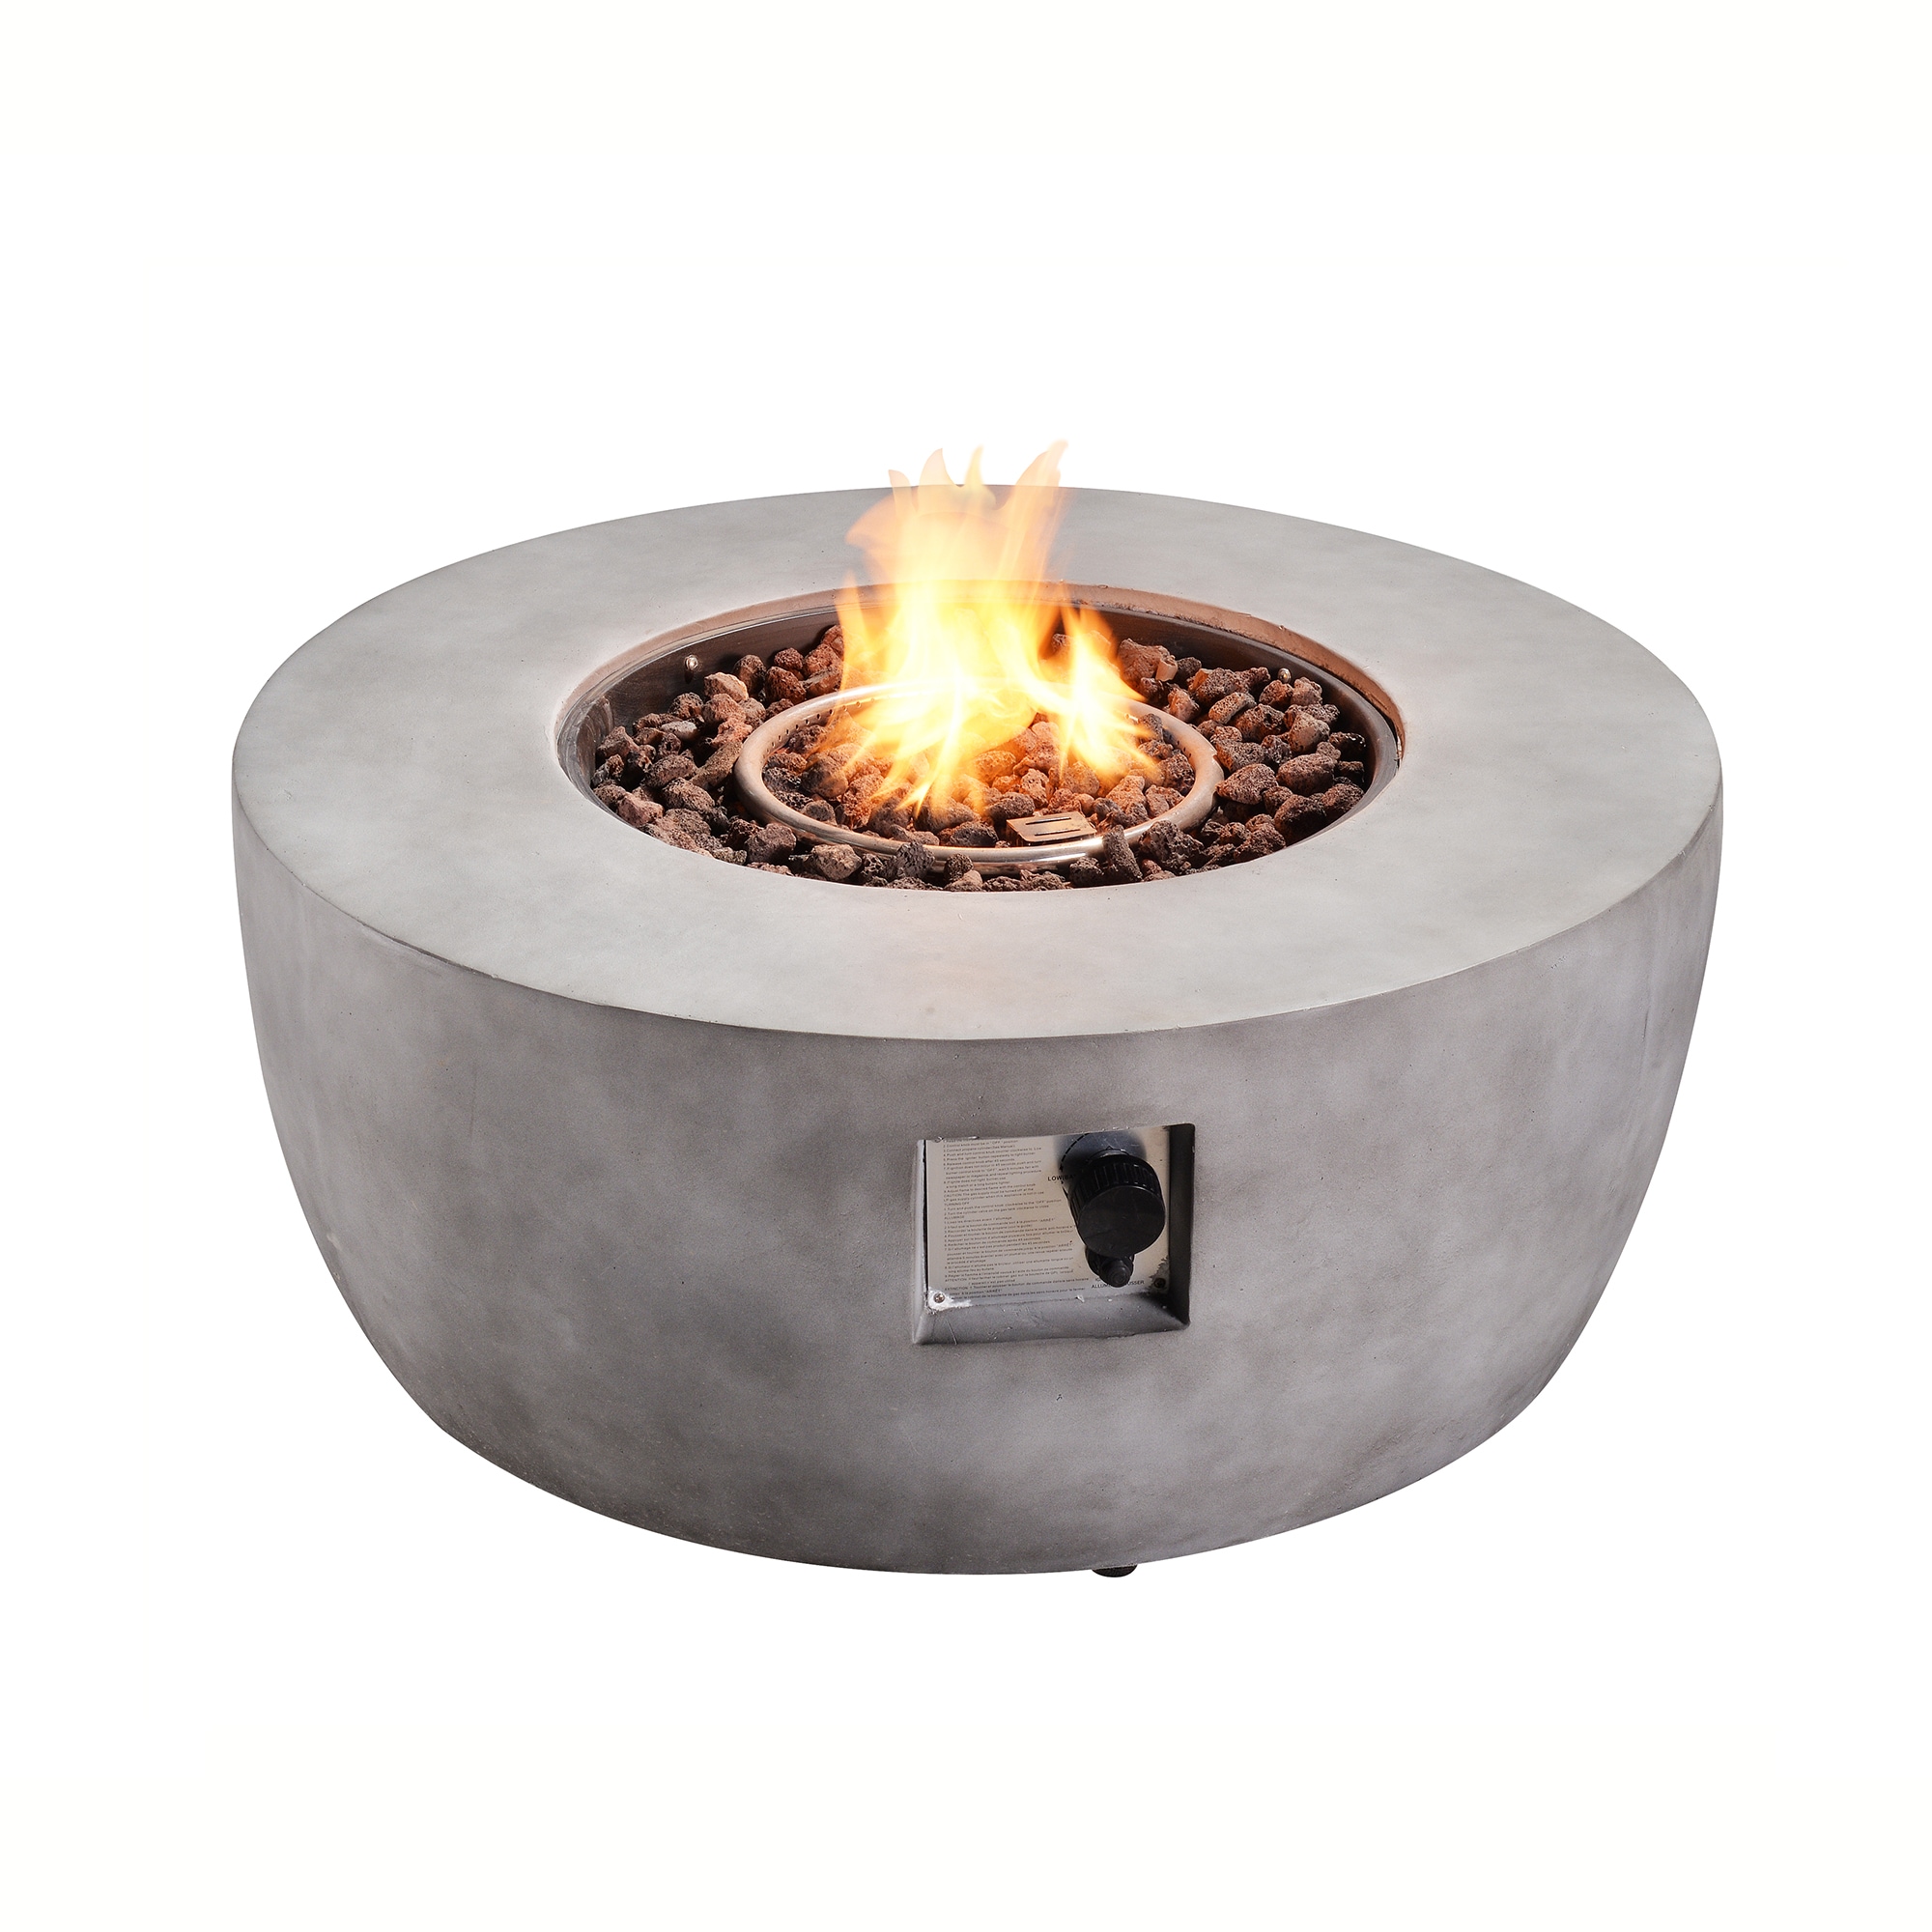 Concrete Propane Gas Fire Pit, How To Make A Homemade Propane Fire Pit